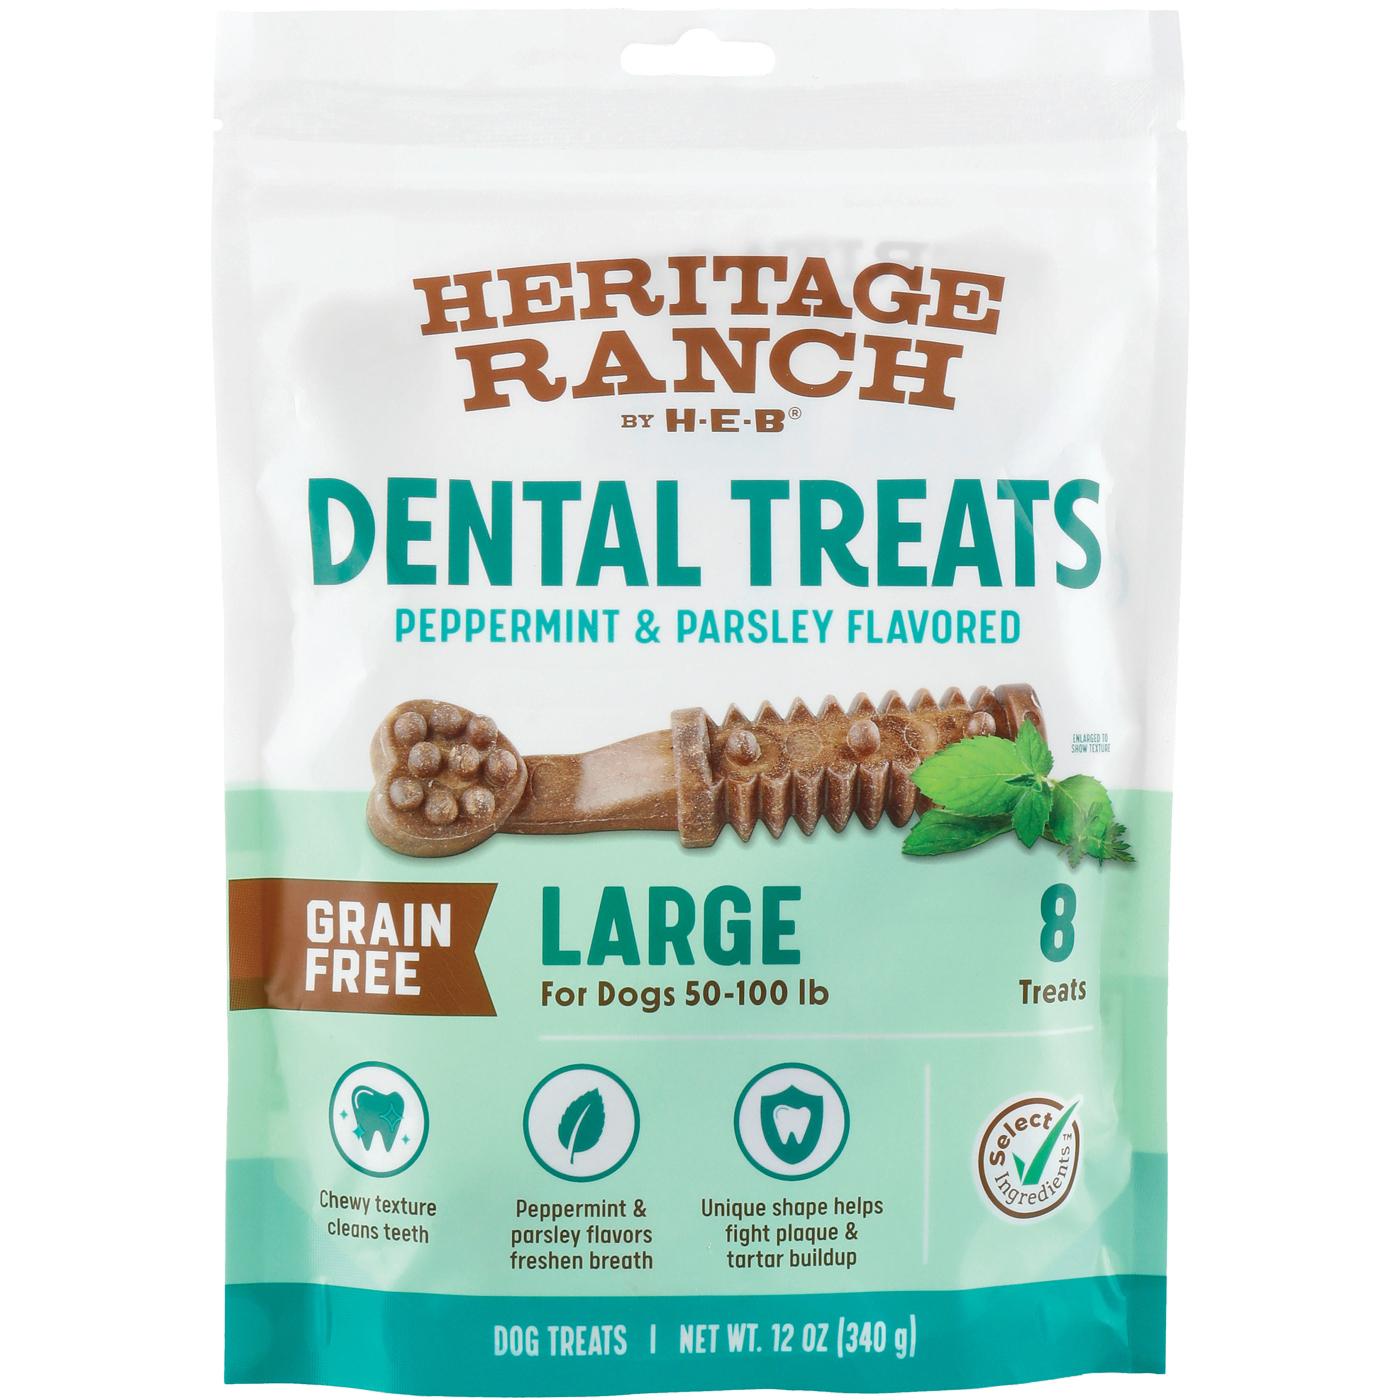 Heritage Ranch by H-E-B Grain Free Peppermint & Parsley Large Breed Dental Dog Treats; image 1 of 2